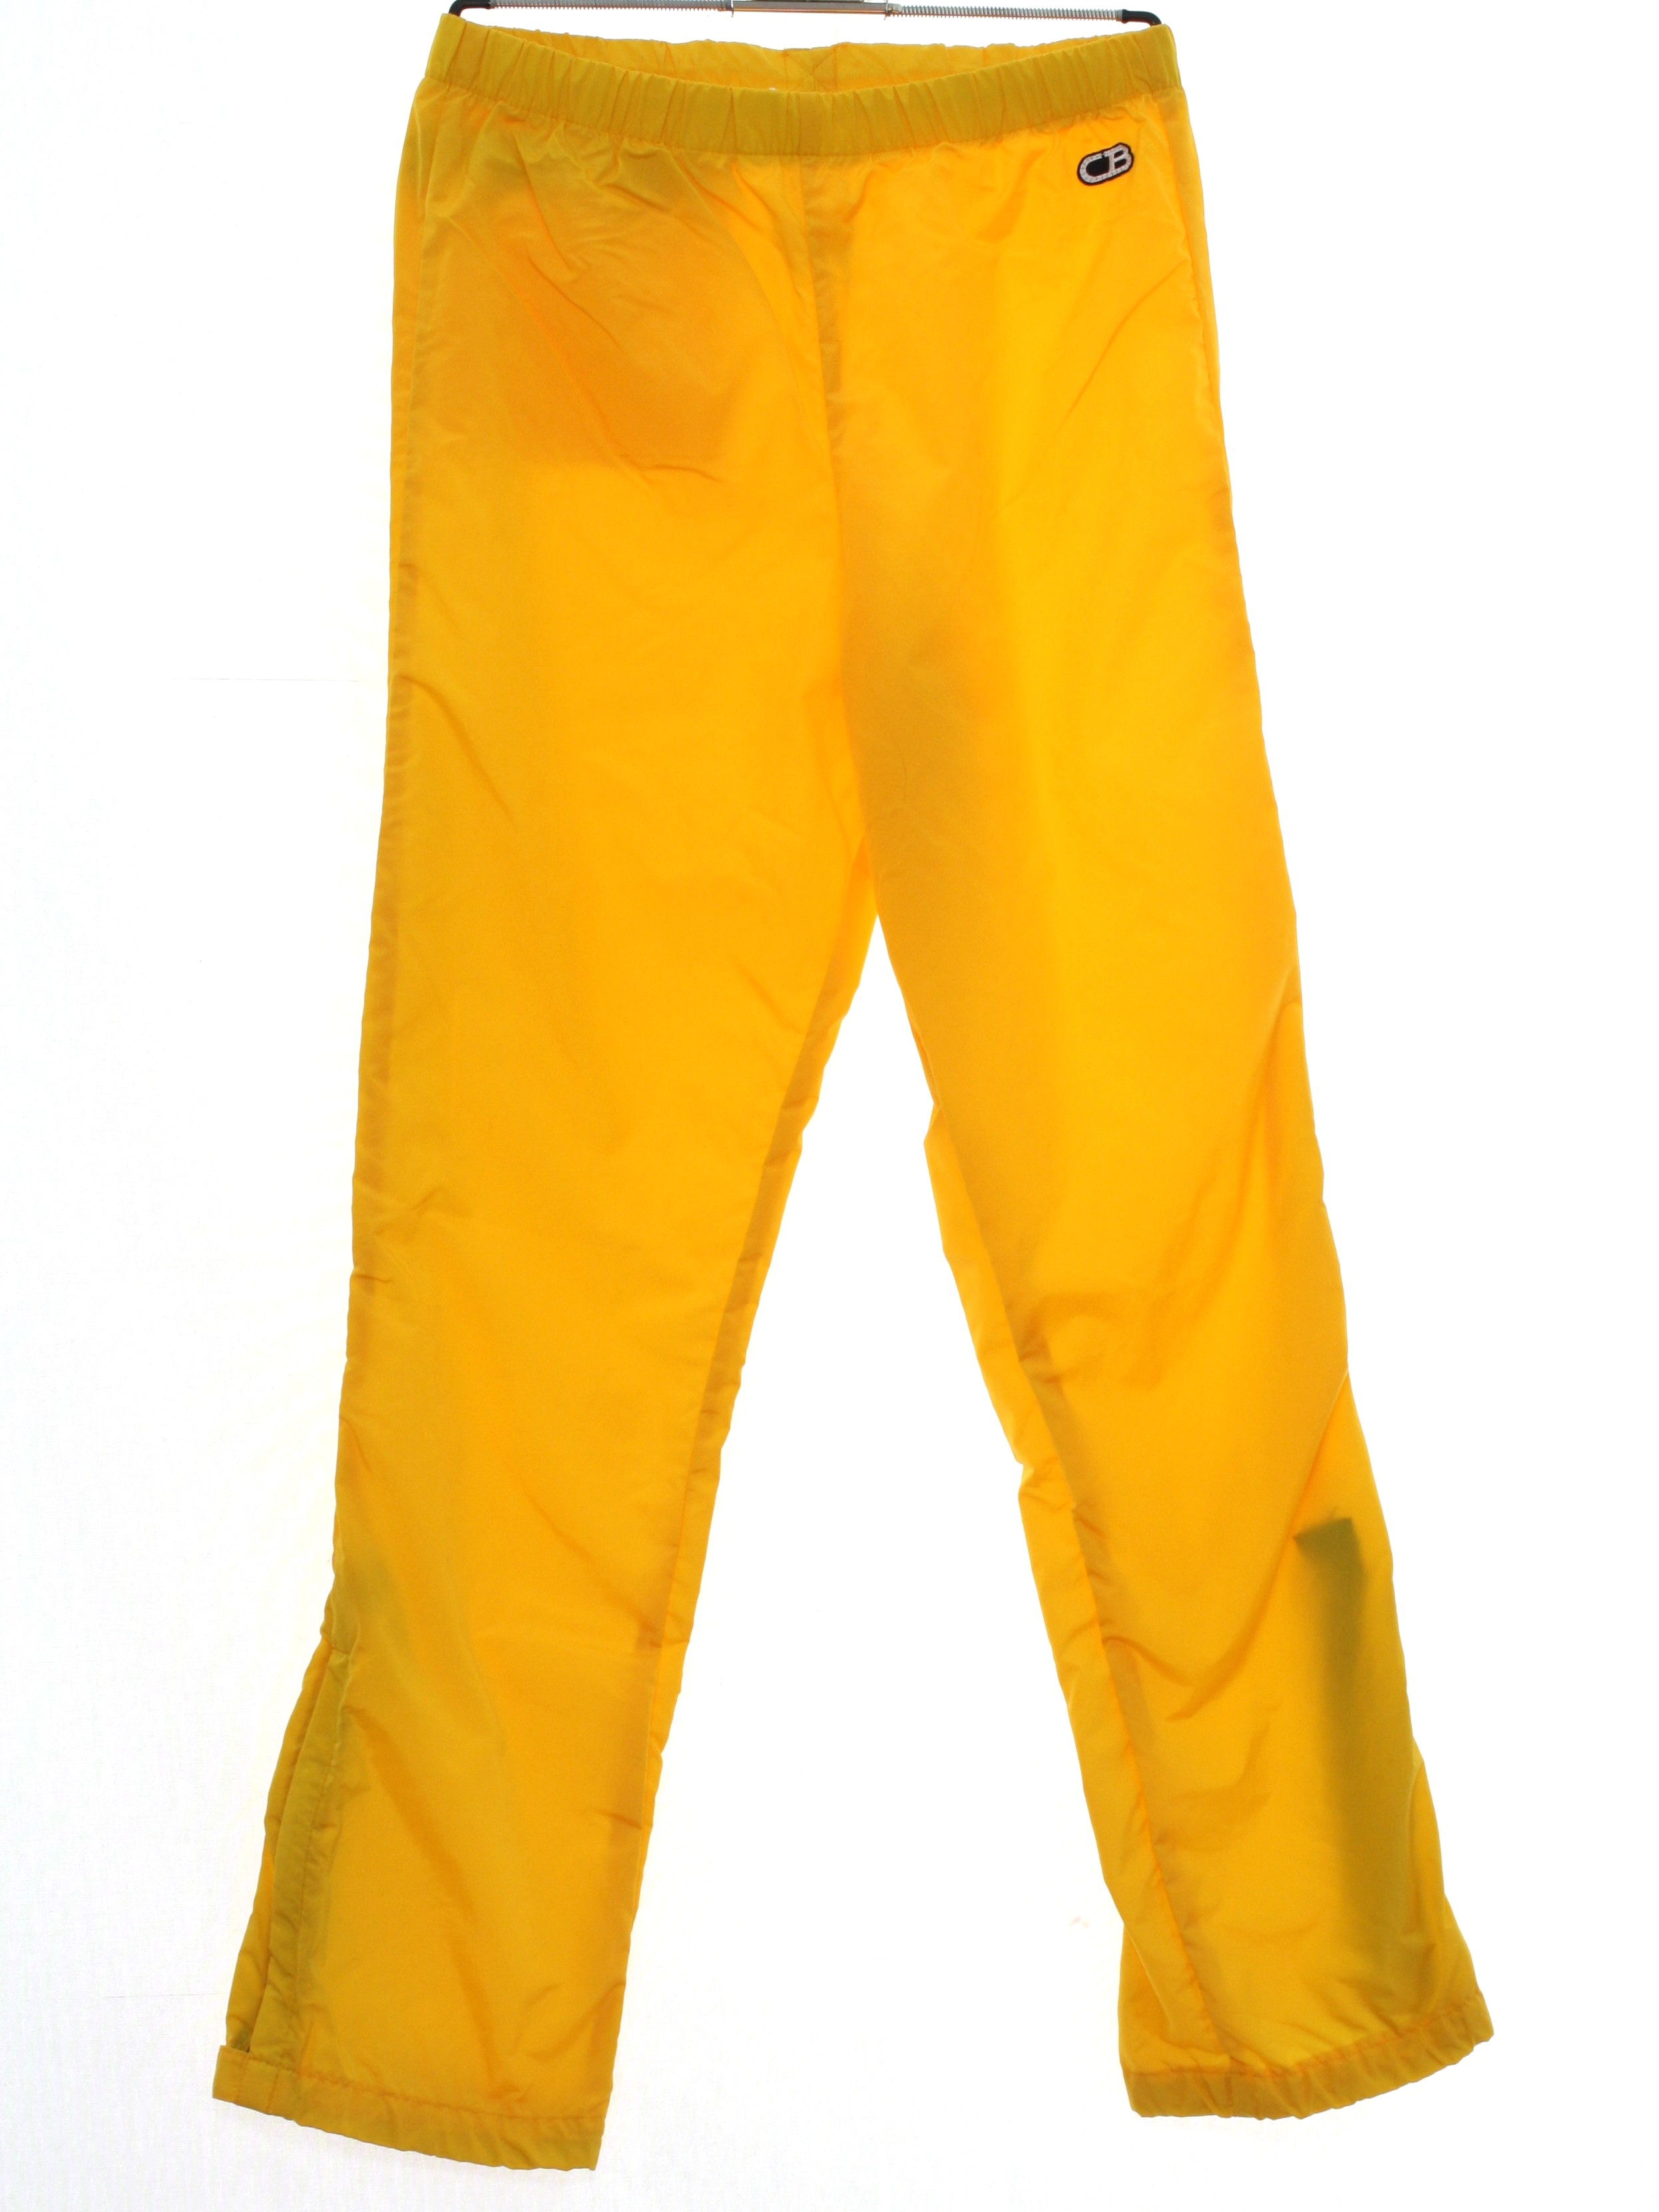 Vintage 1980's Pants: 80s -CB Sports 1985- Mens goldenrod yellow background  nylon shell drawstring elastic waist baggy nylon totally 80s baggy wide leg track  pants with zipper and snap closure at ankles